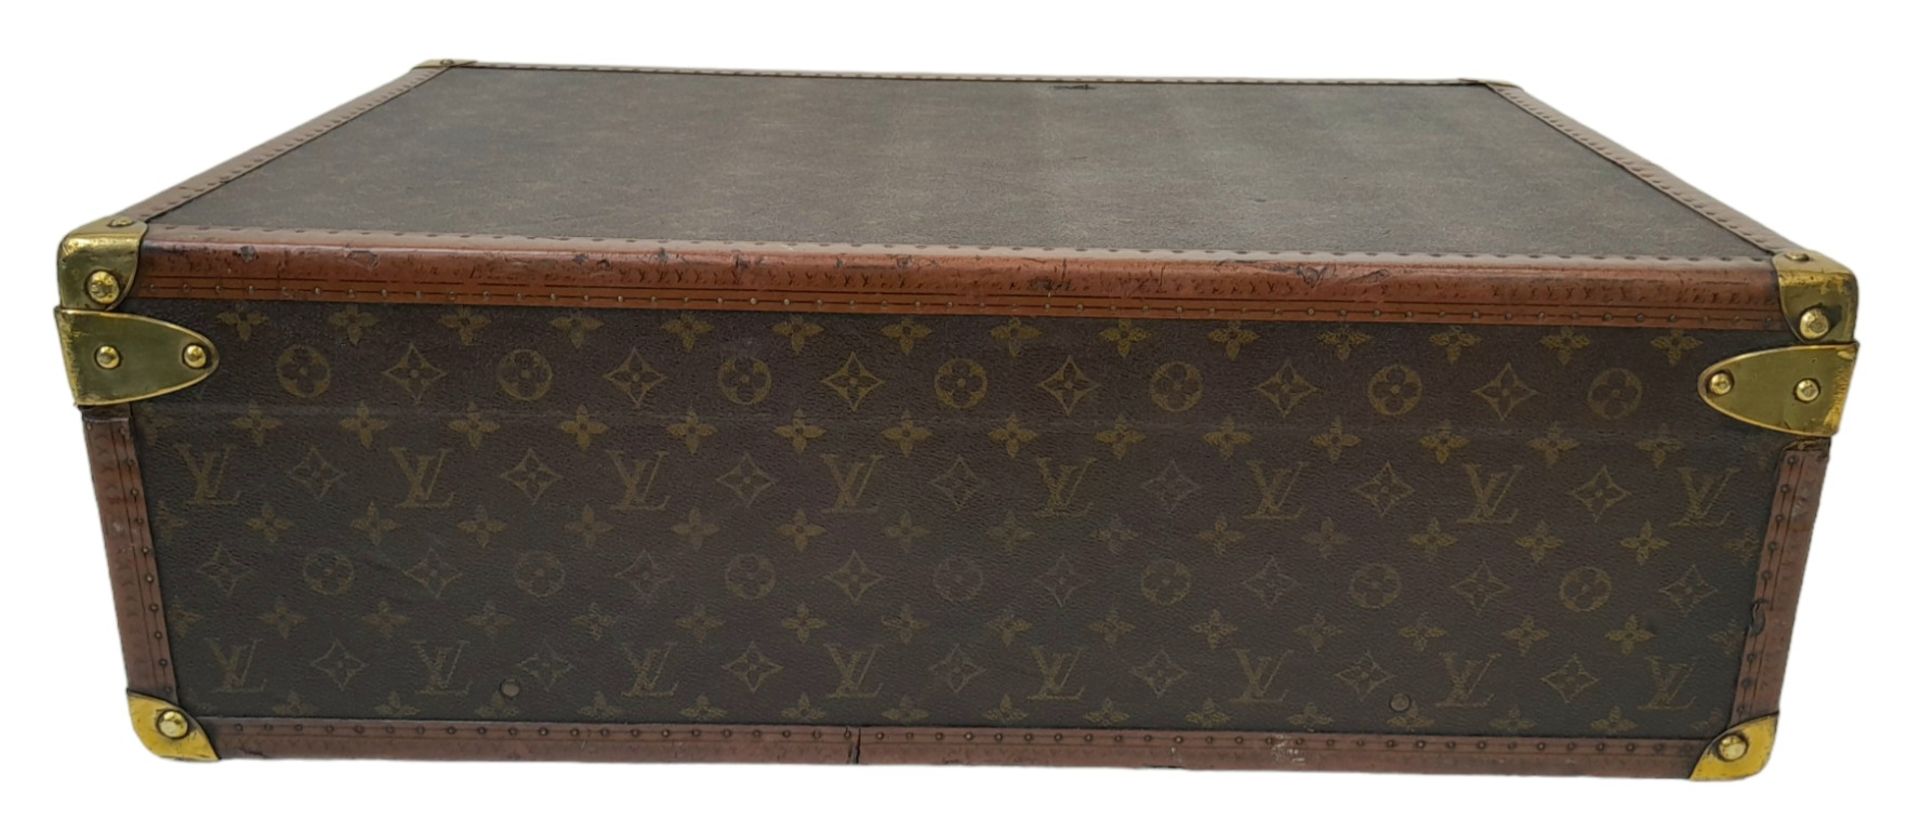 A Vintage Possibly Antique Louis Vuitton Trunk/Hard Suitcase. The smaller brother of Lot 38! - Bild 5 aus 12